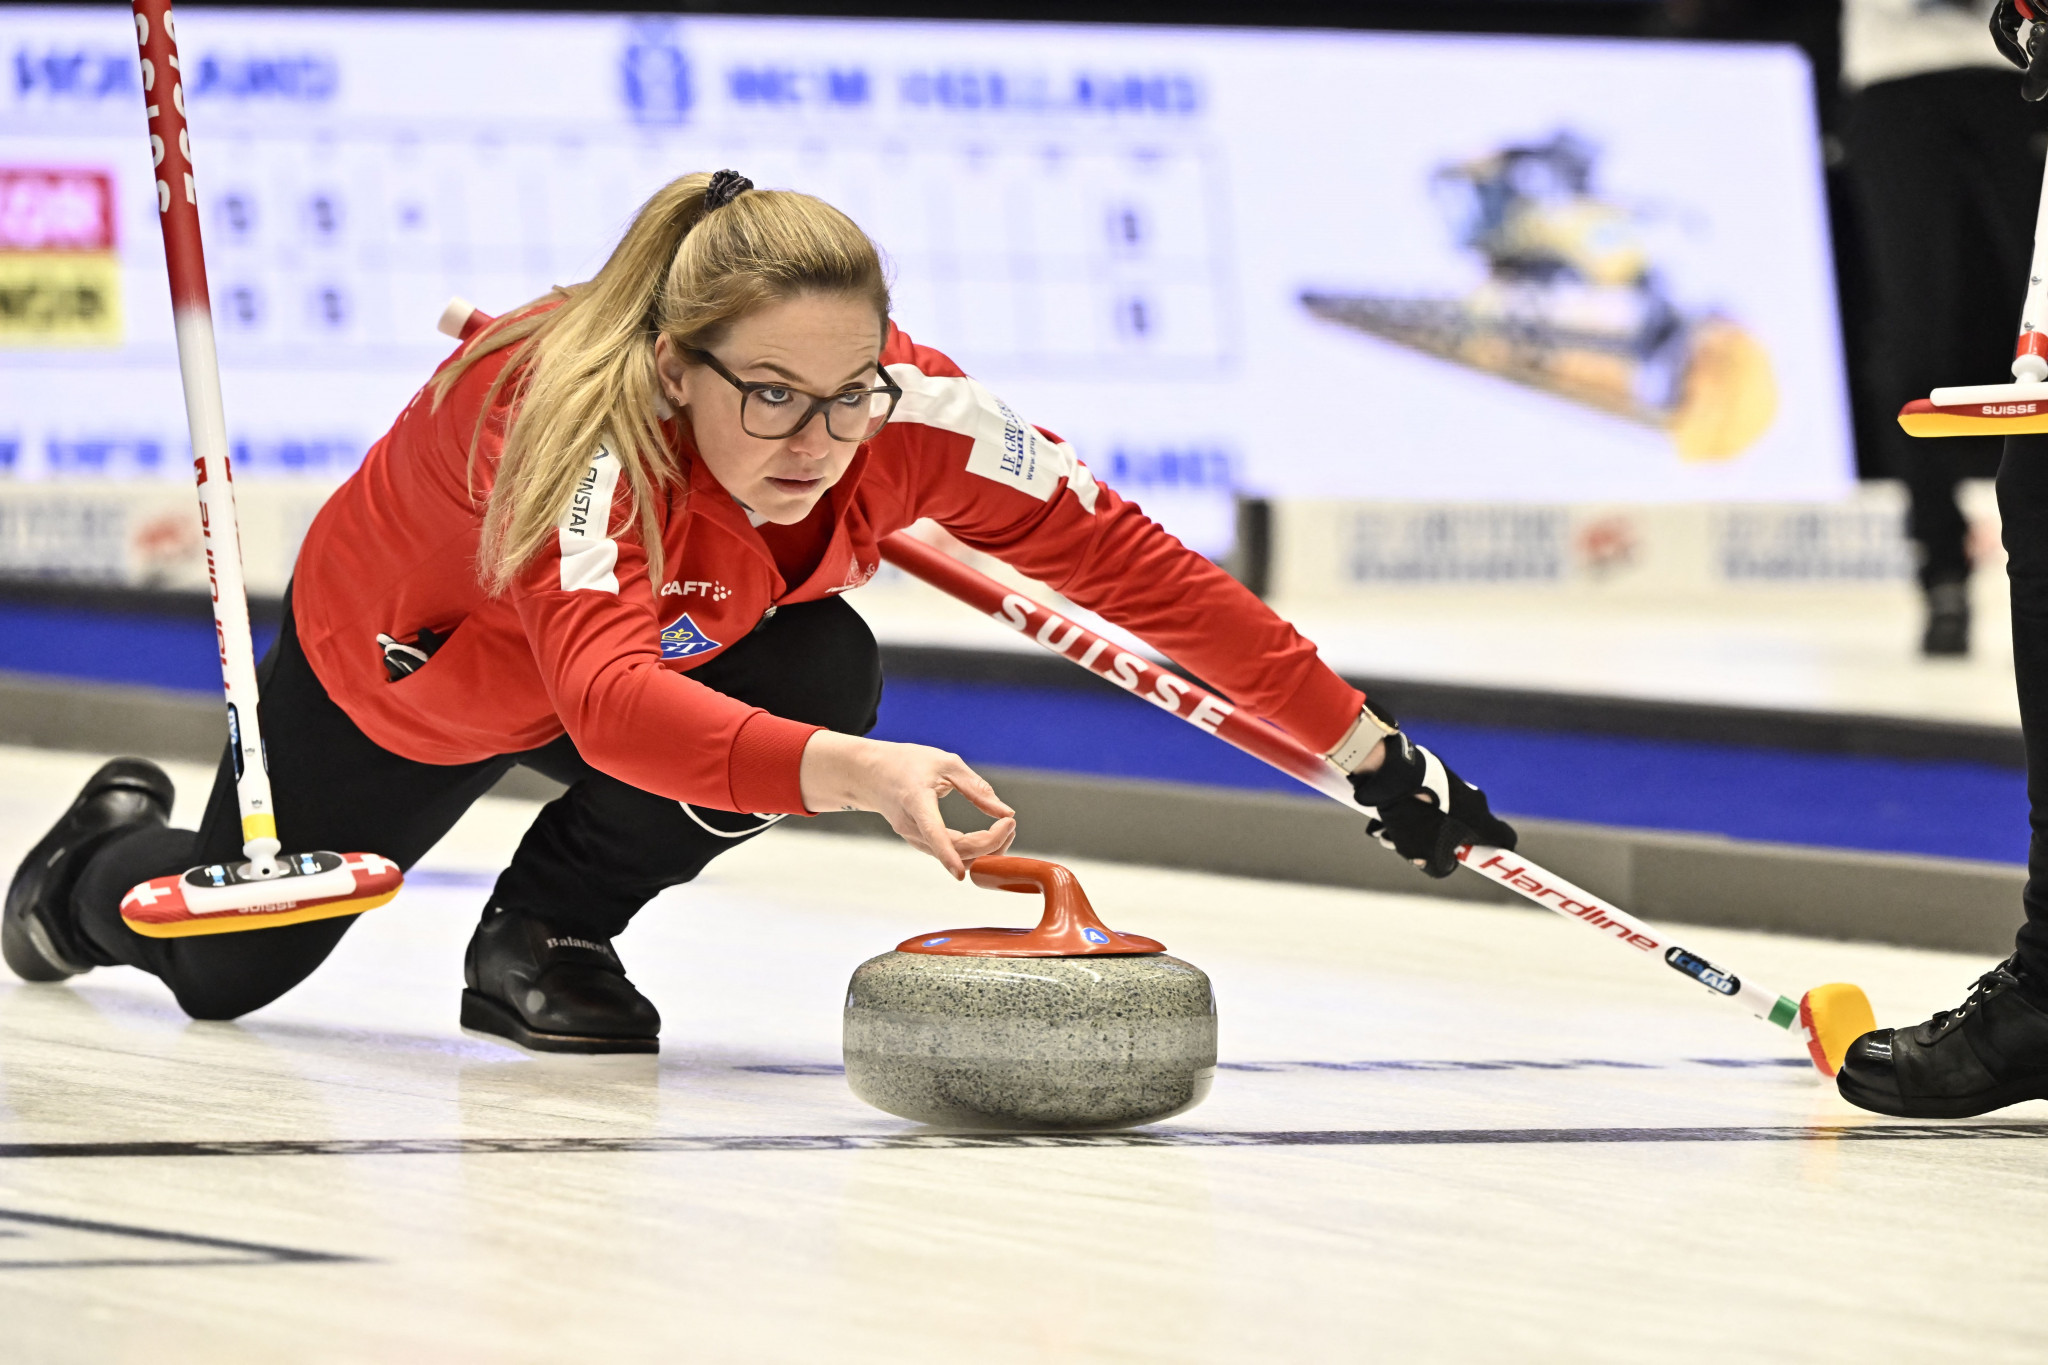 Switzerland impress with two more wins at World Women's Curling